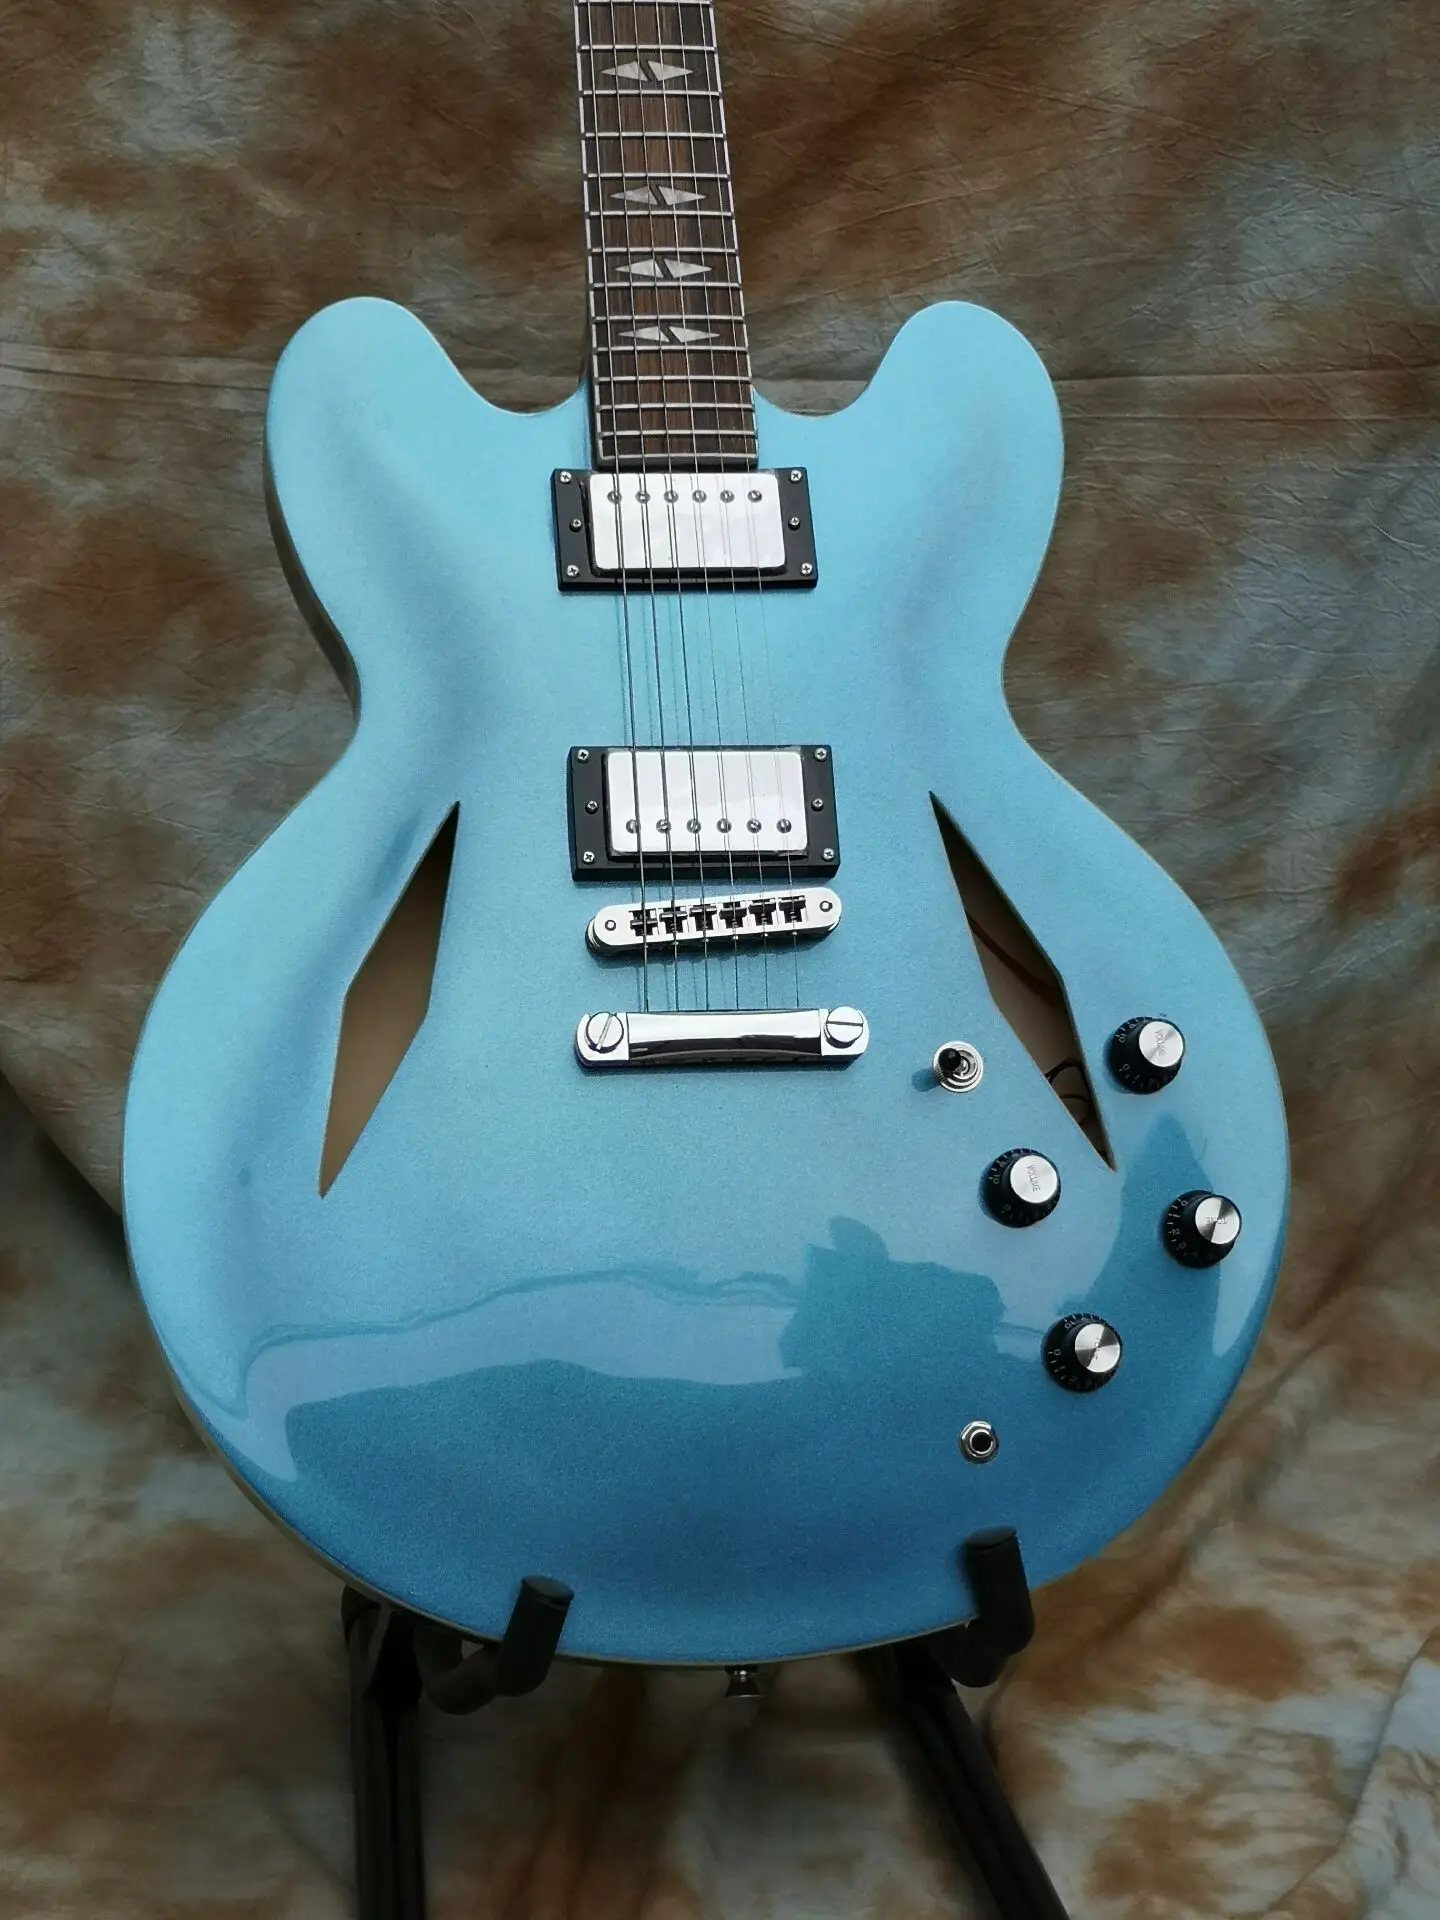 Limited Time Sale, DaveGrohl 335 Electric Guitar, Semi Hollow Body, Jazz, Metalic Blue